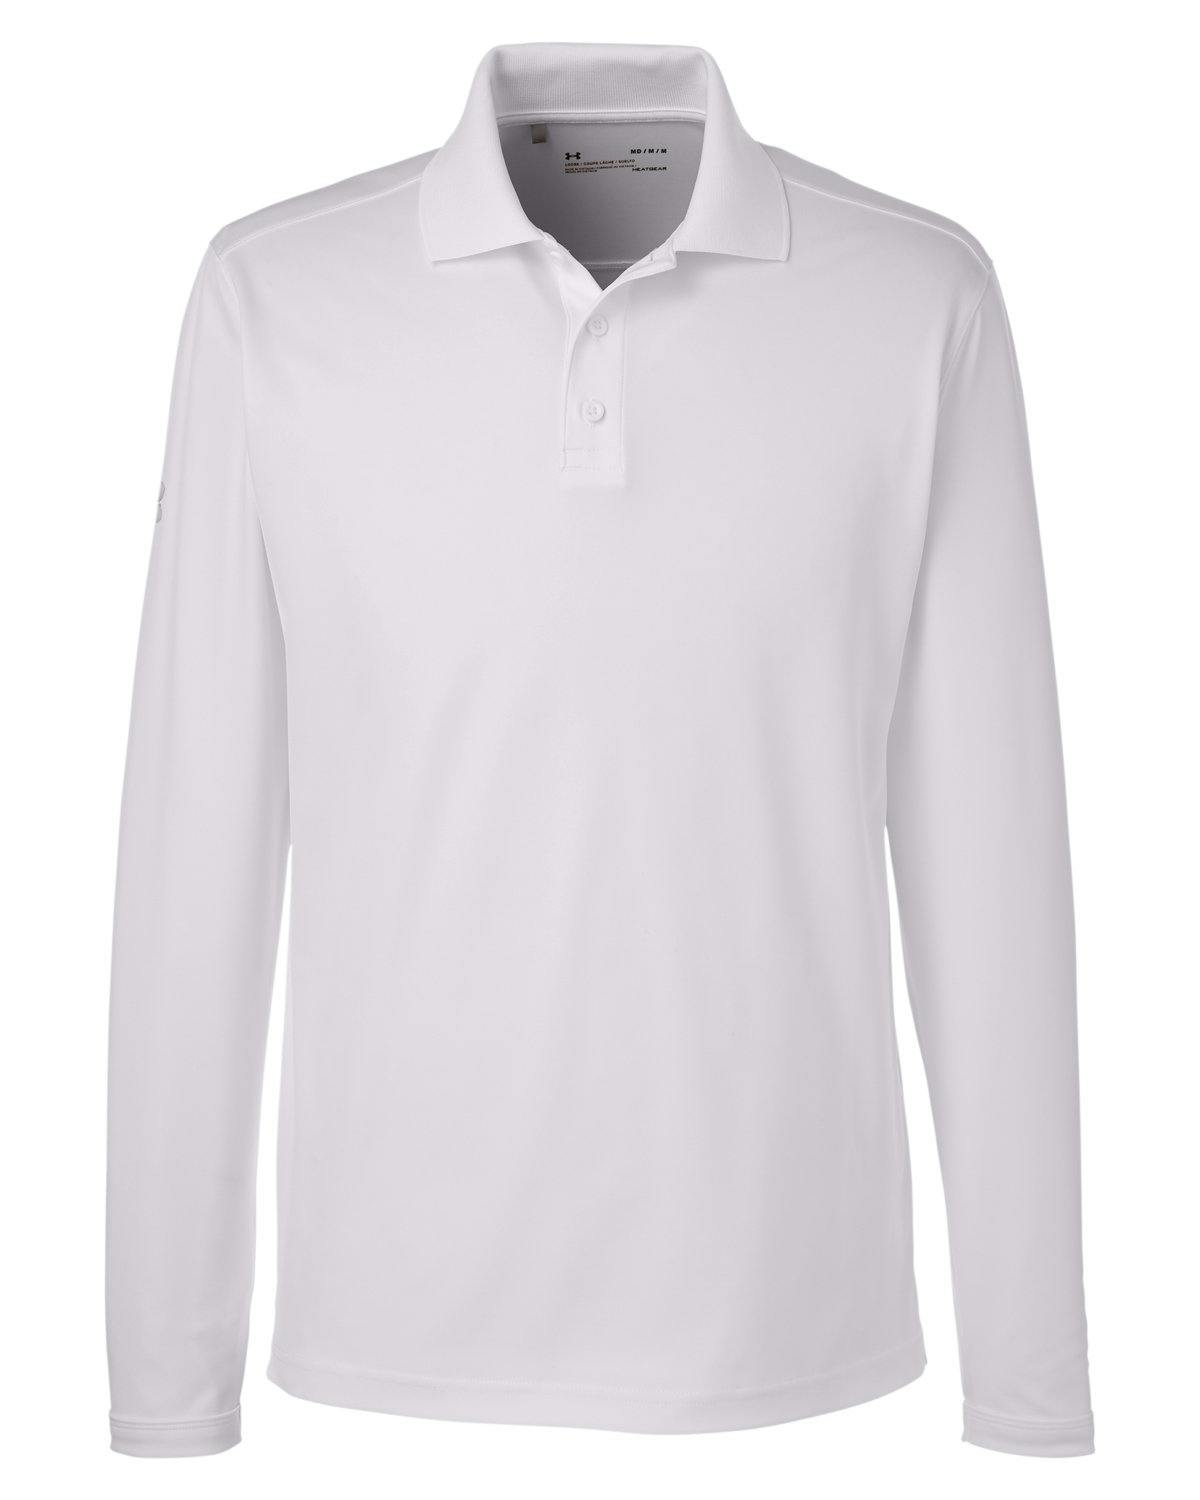 Image for Mens Corporate Long-Sleeve Performance Polo